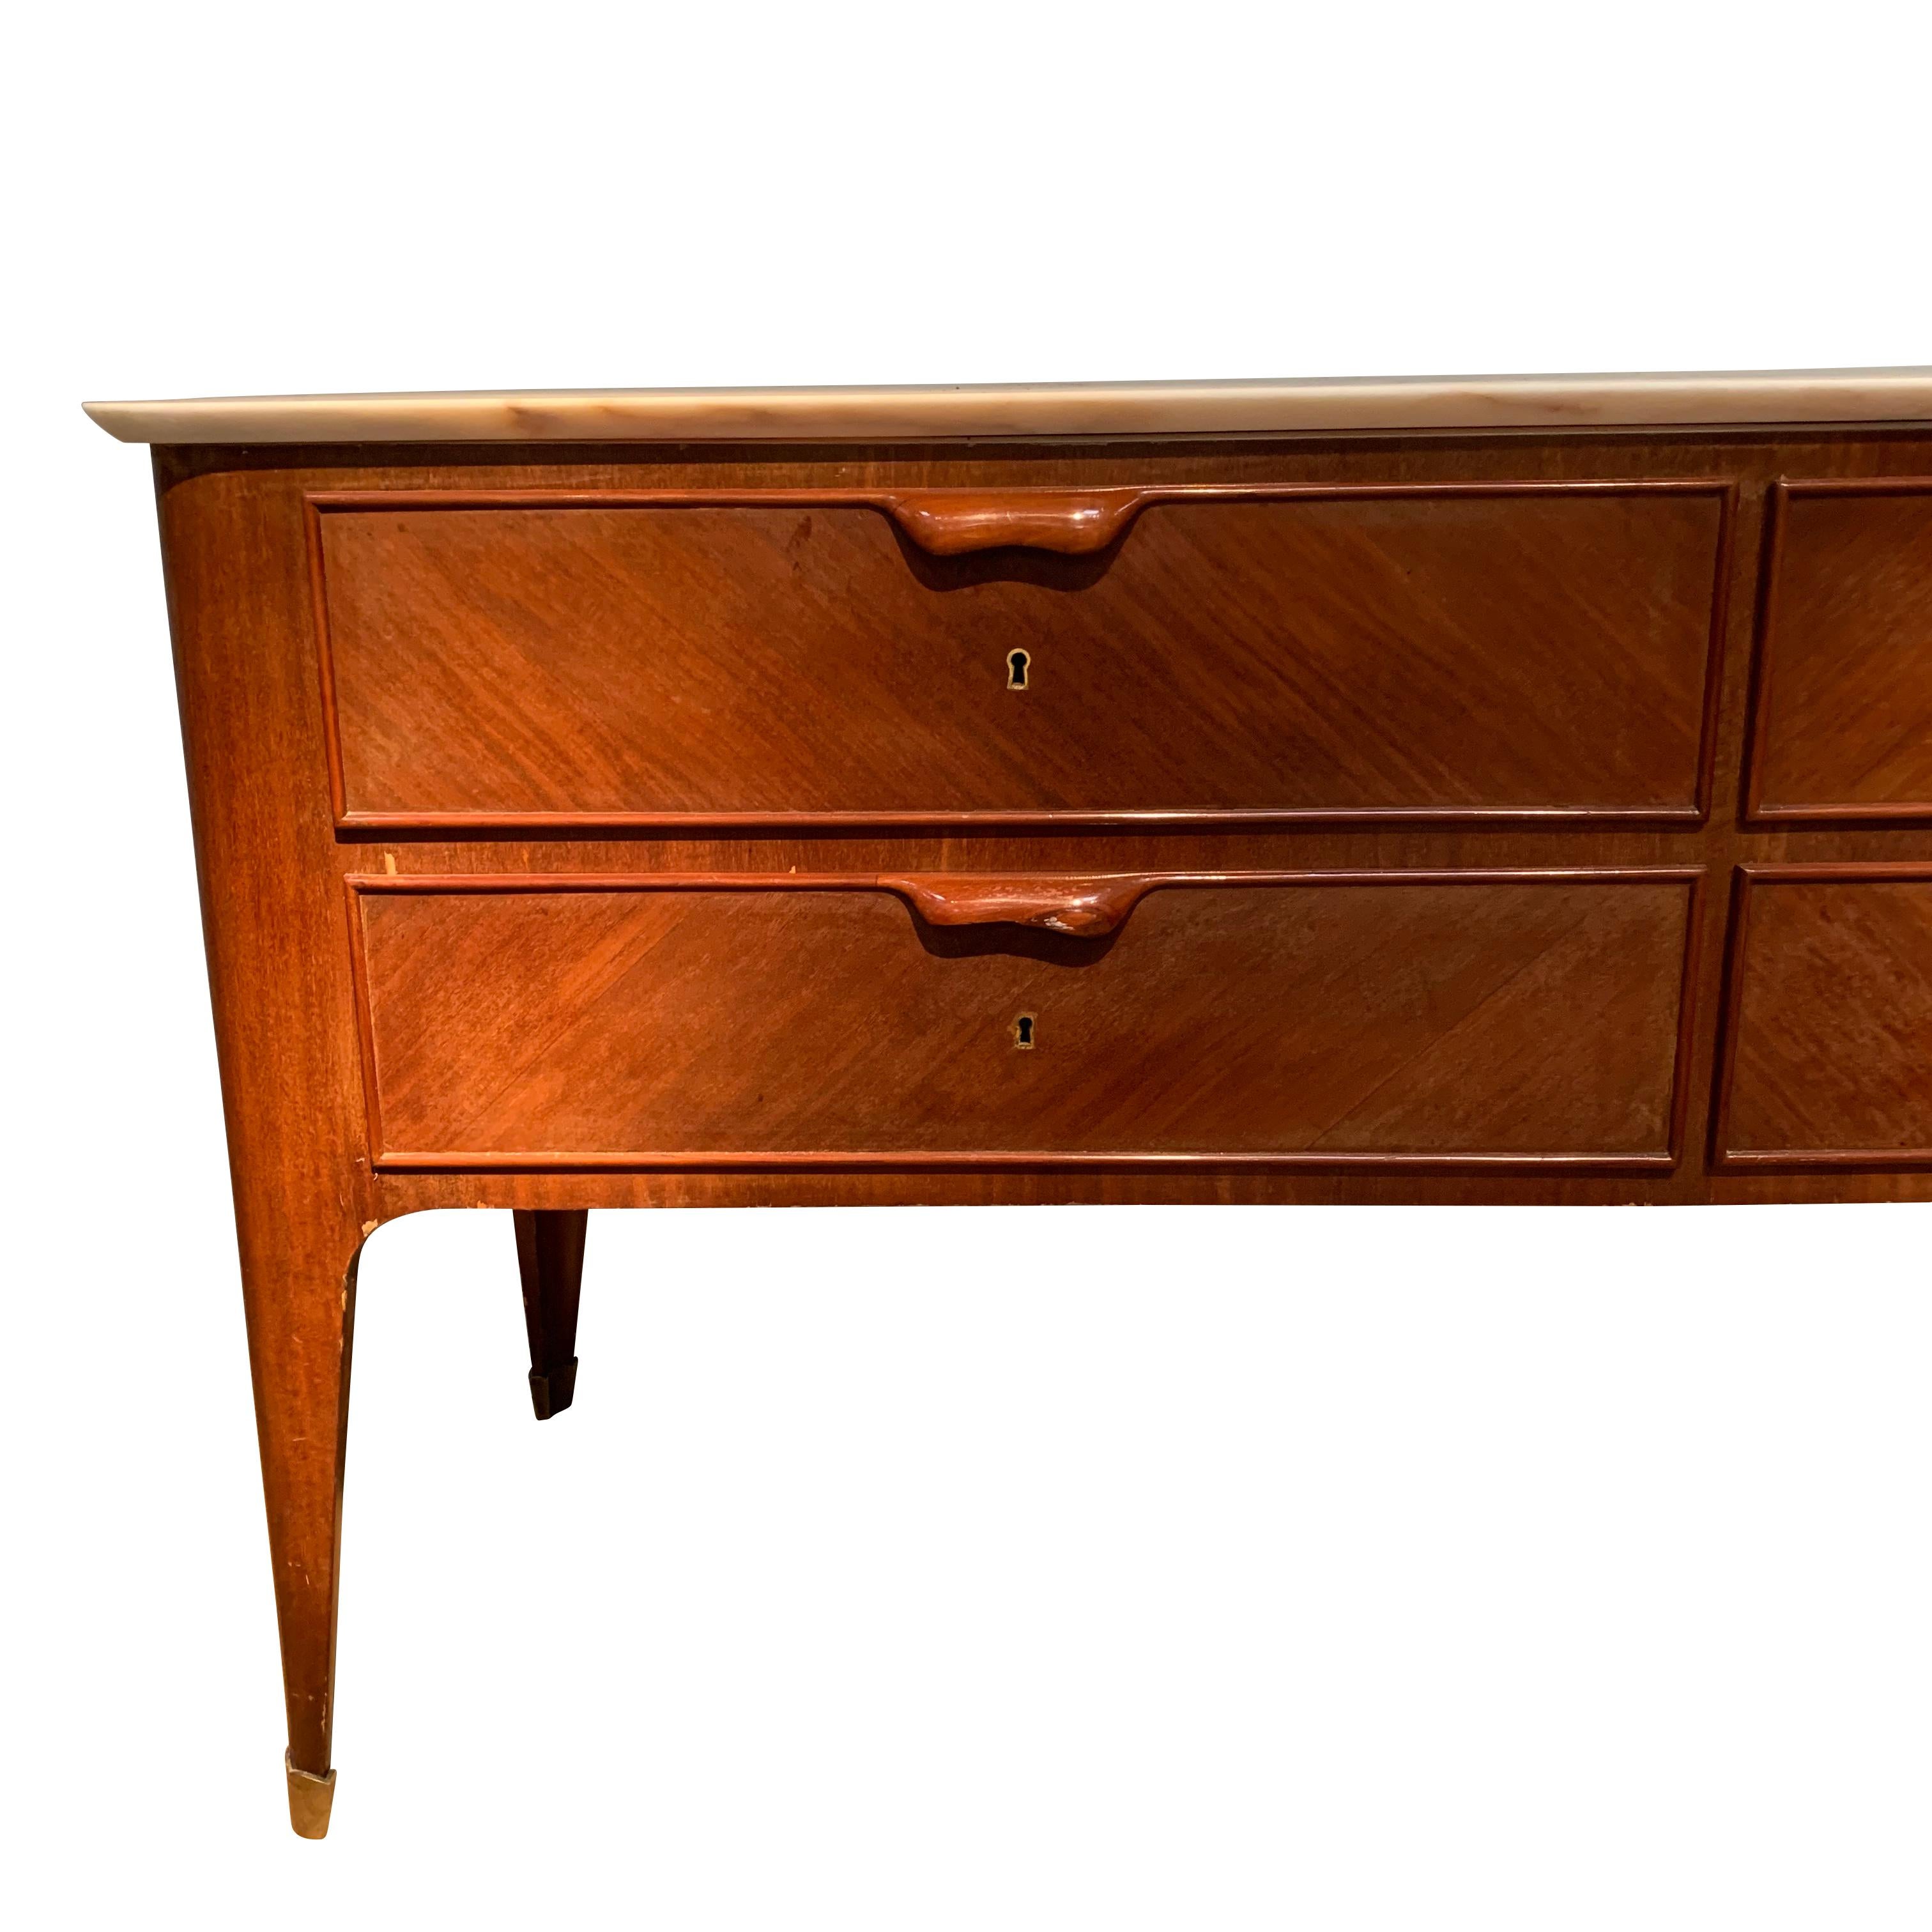 1940s Italian credenza designed by Paolo Buffa
Four drawers with a marble top
Pallisander wood
Bronze sabots.
 